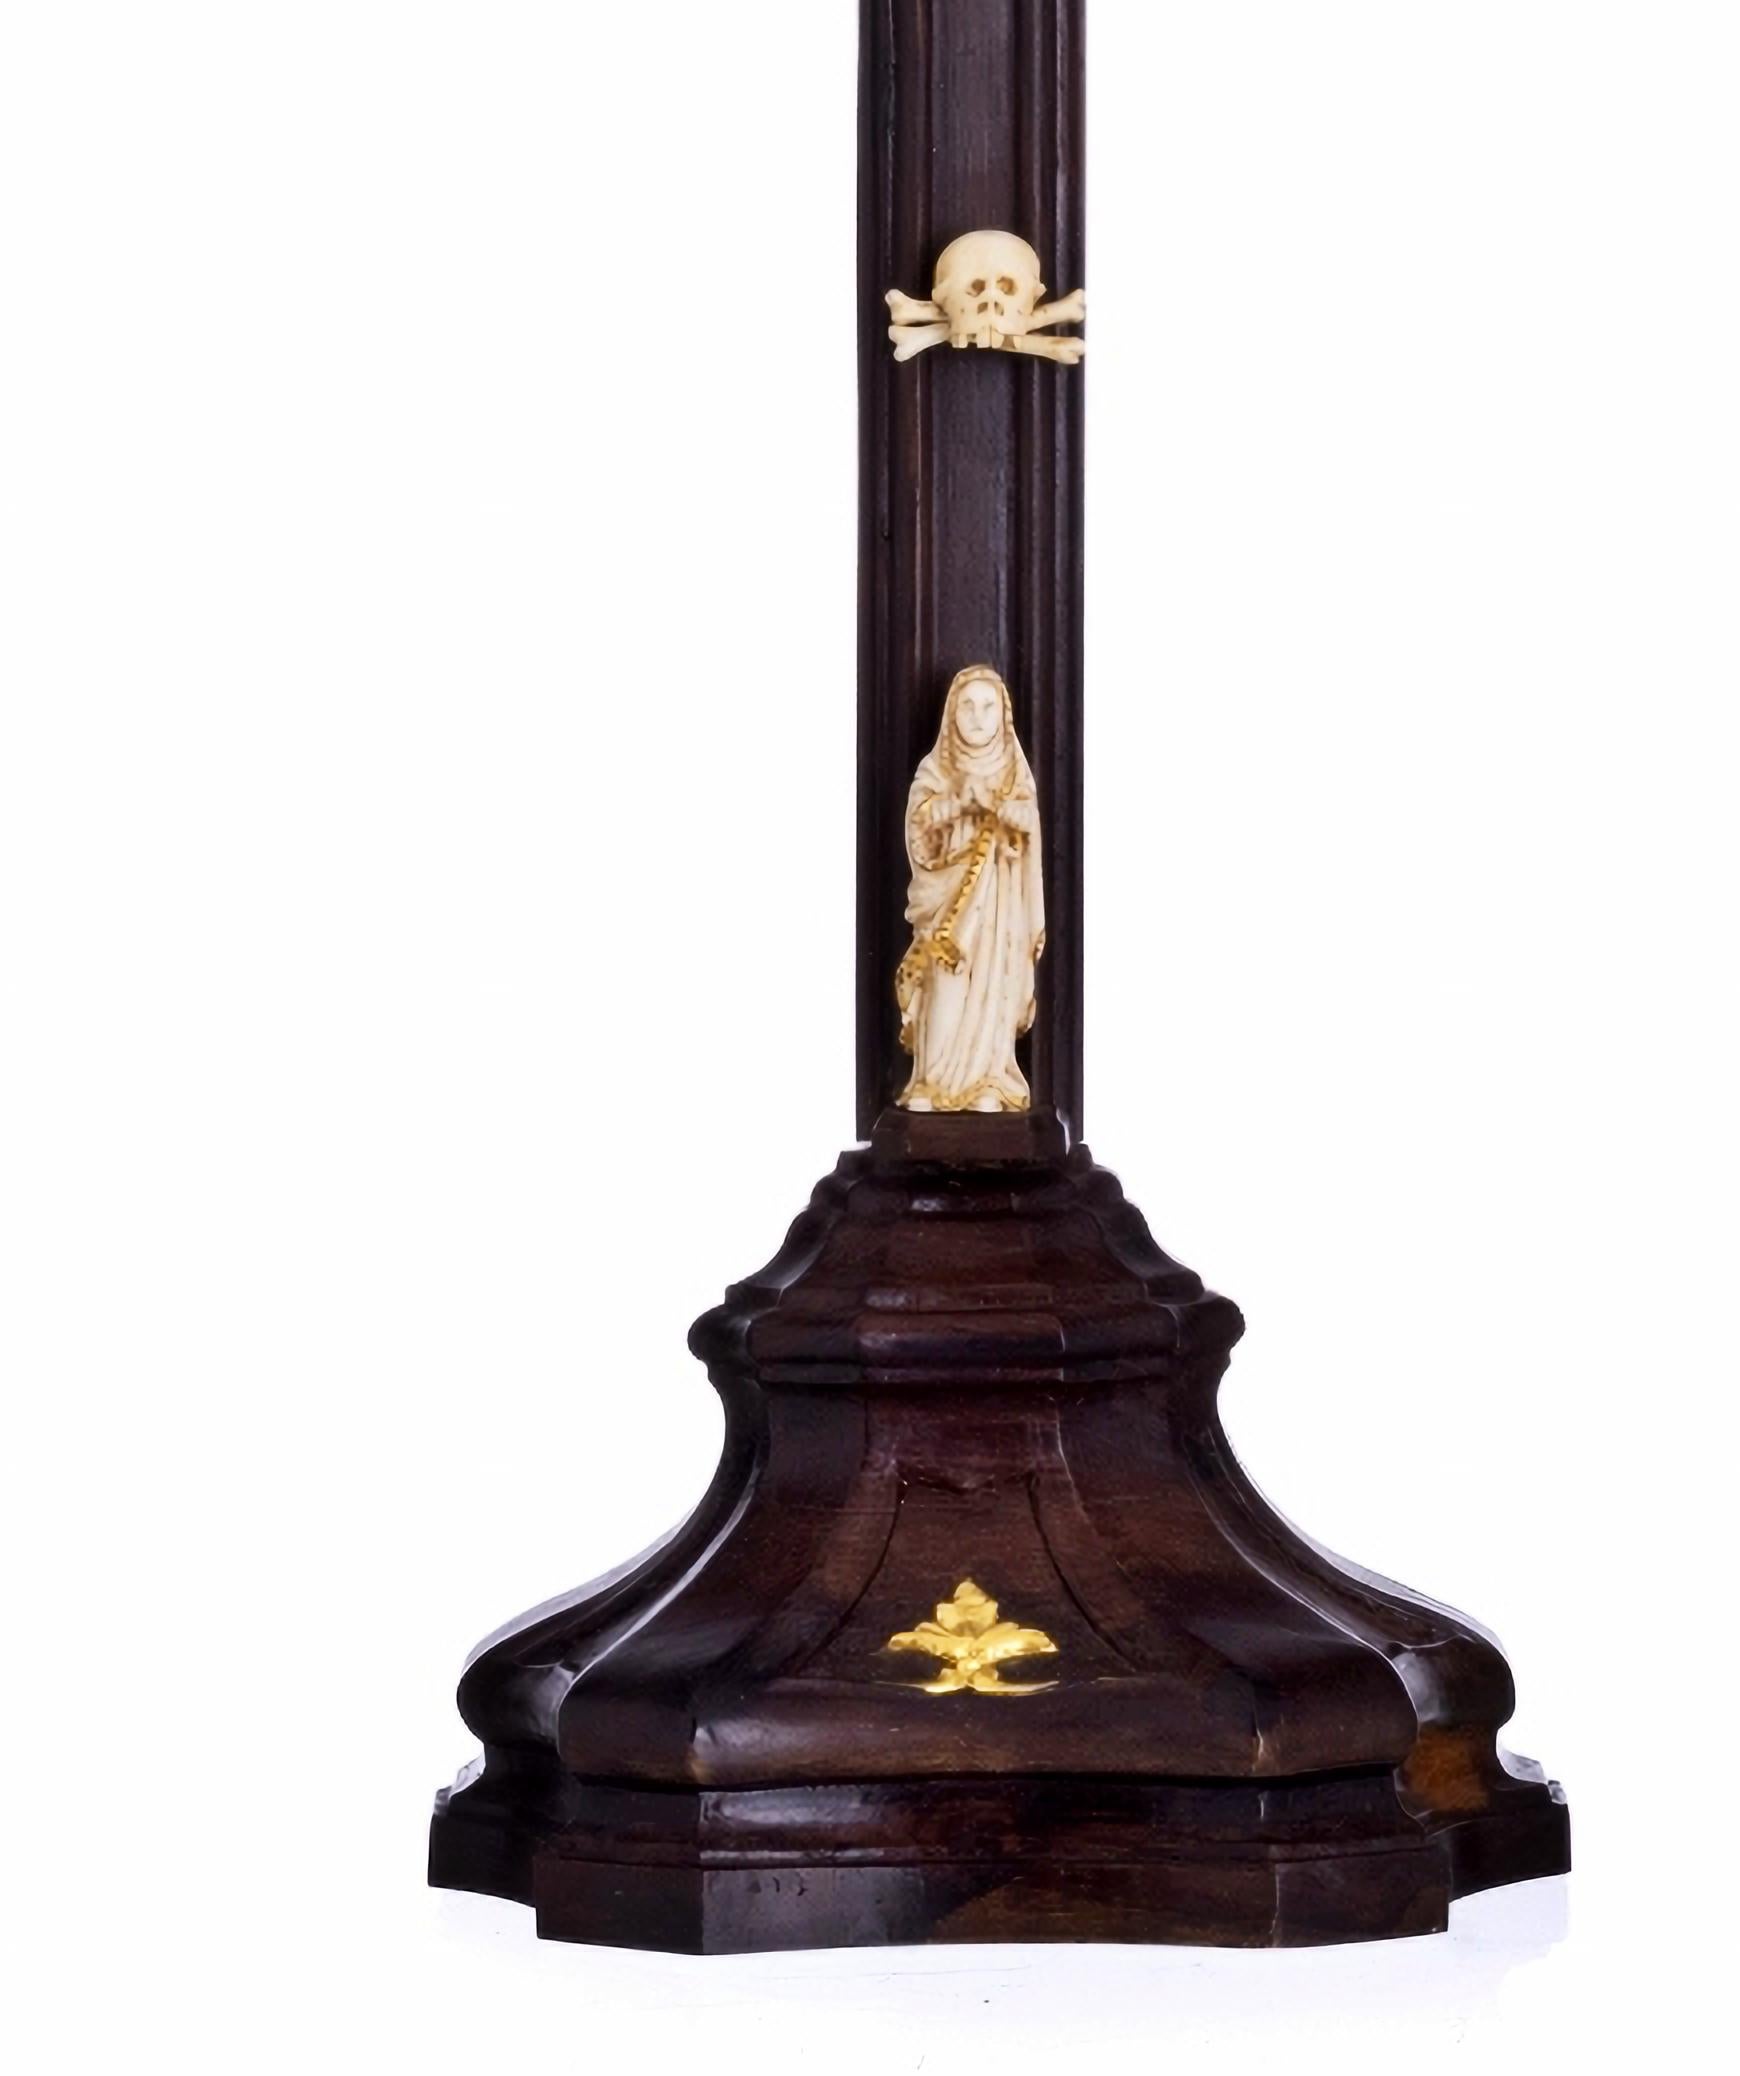 JESUS CHRIST CRUCIFIED OUR LADY OF Sorrows
17th Century
Indo-Portuguese Sculptures
in ivor...
Cross in rosewood wood with gilding. Plaque 